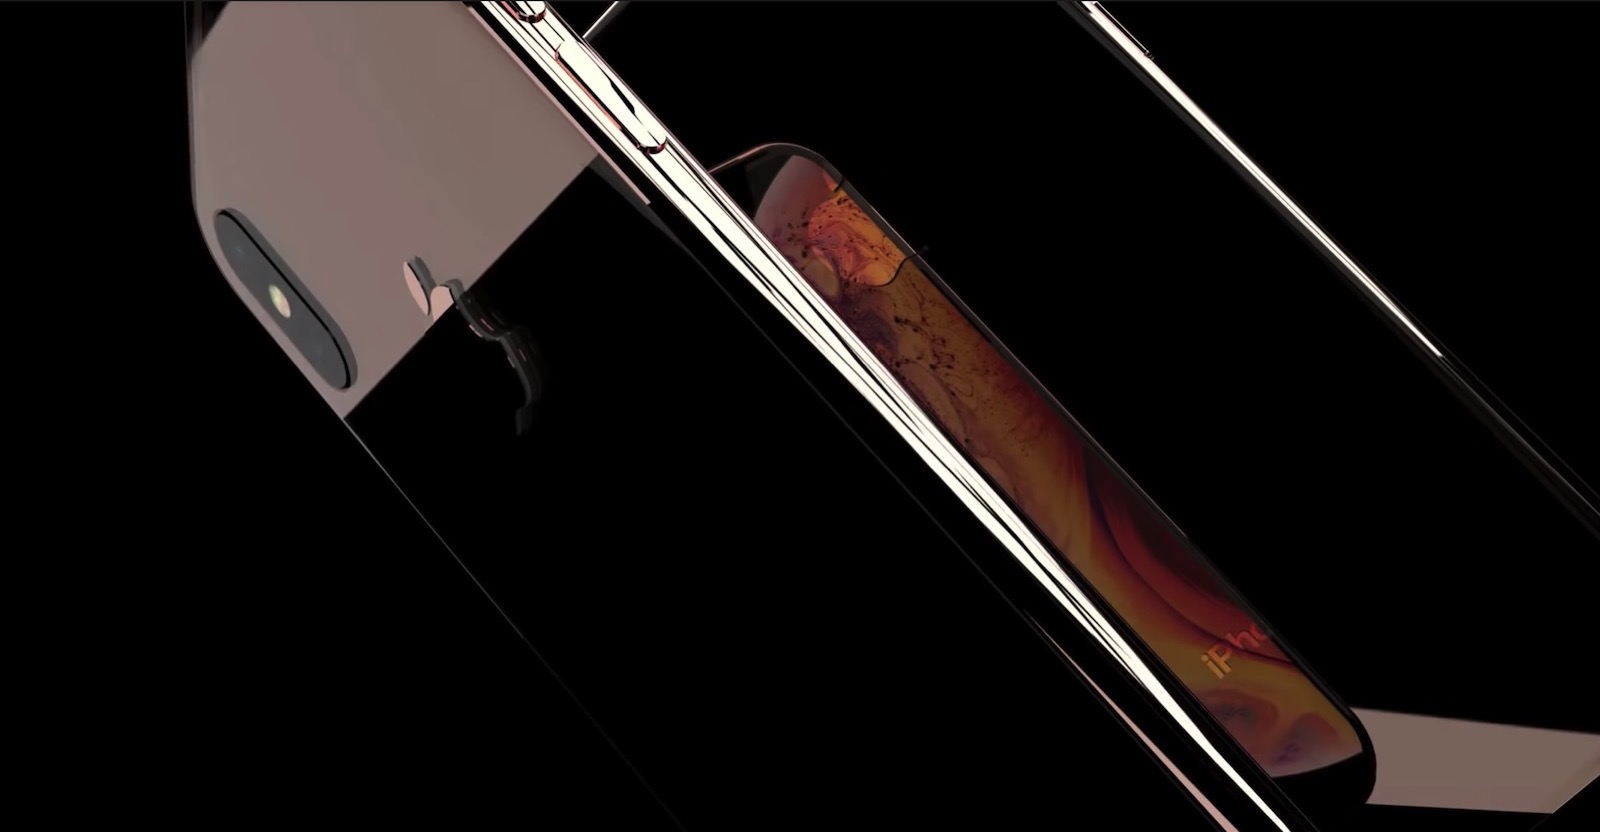 iphone-xs-promotion-video-concept.jpg